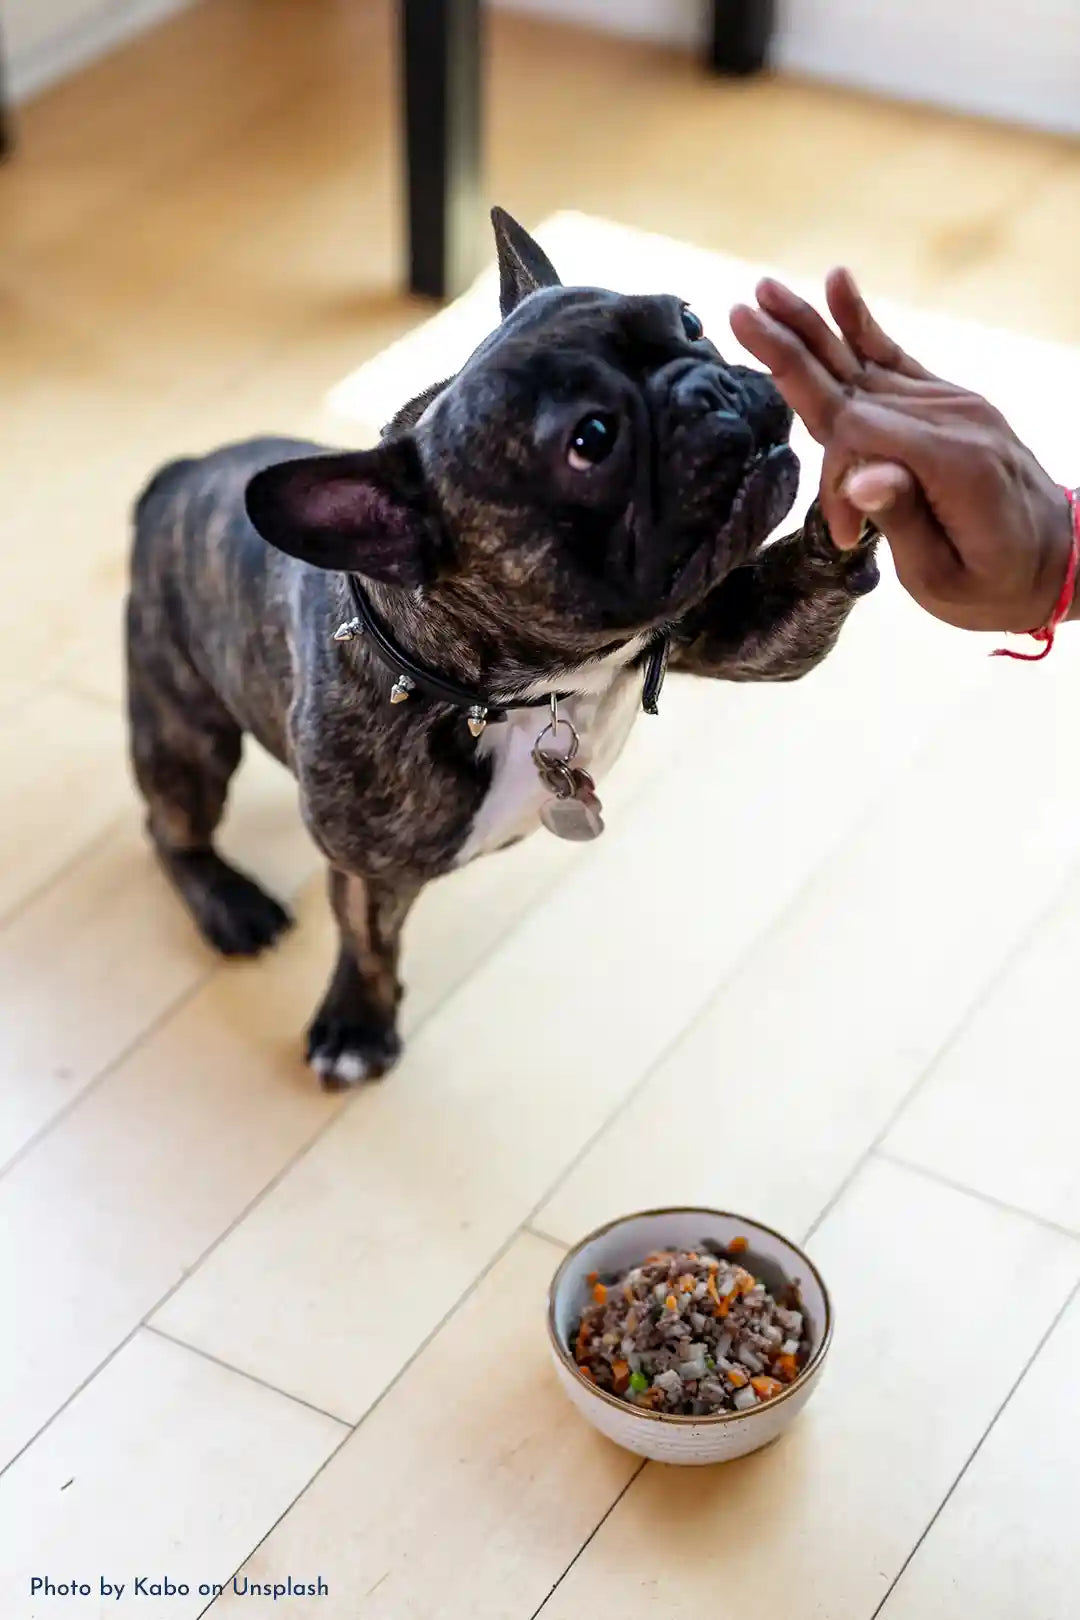 A black Frenchie giving a high five to a black woman's hand. There is a bowl of dog food on the floor